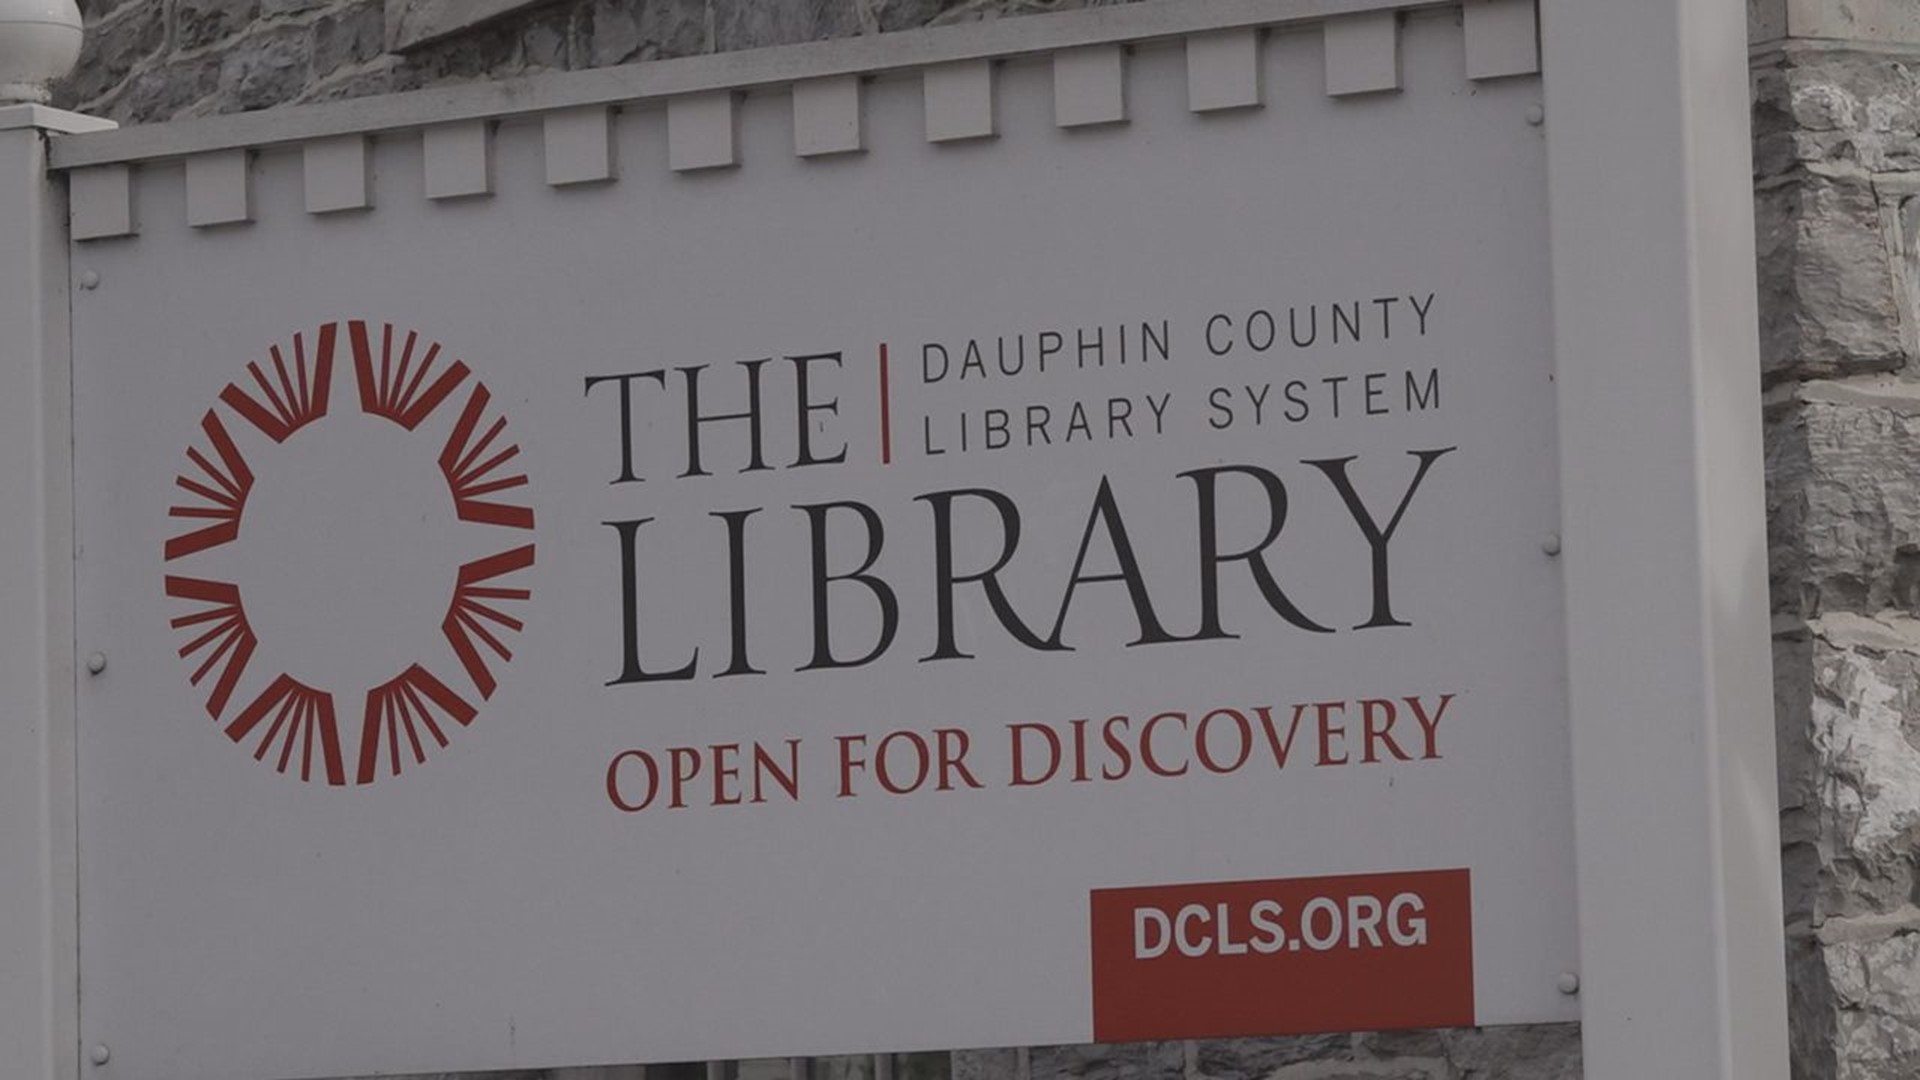 The eight libraries are making a pandemic-era policy permanent, abolishing overdue fines for all patrons.